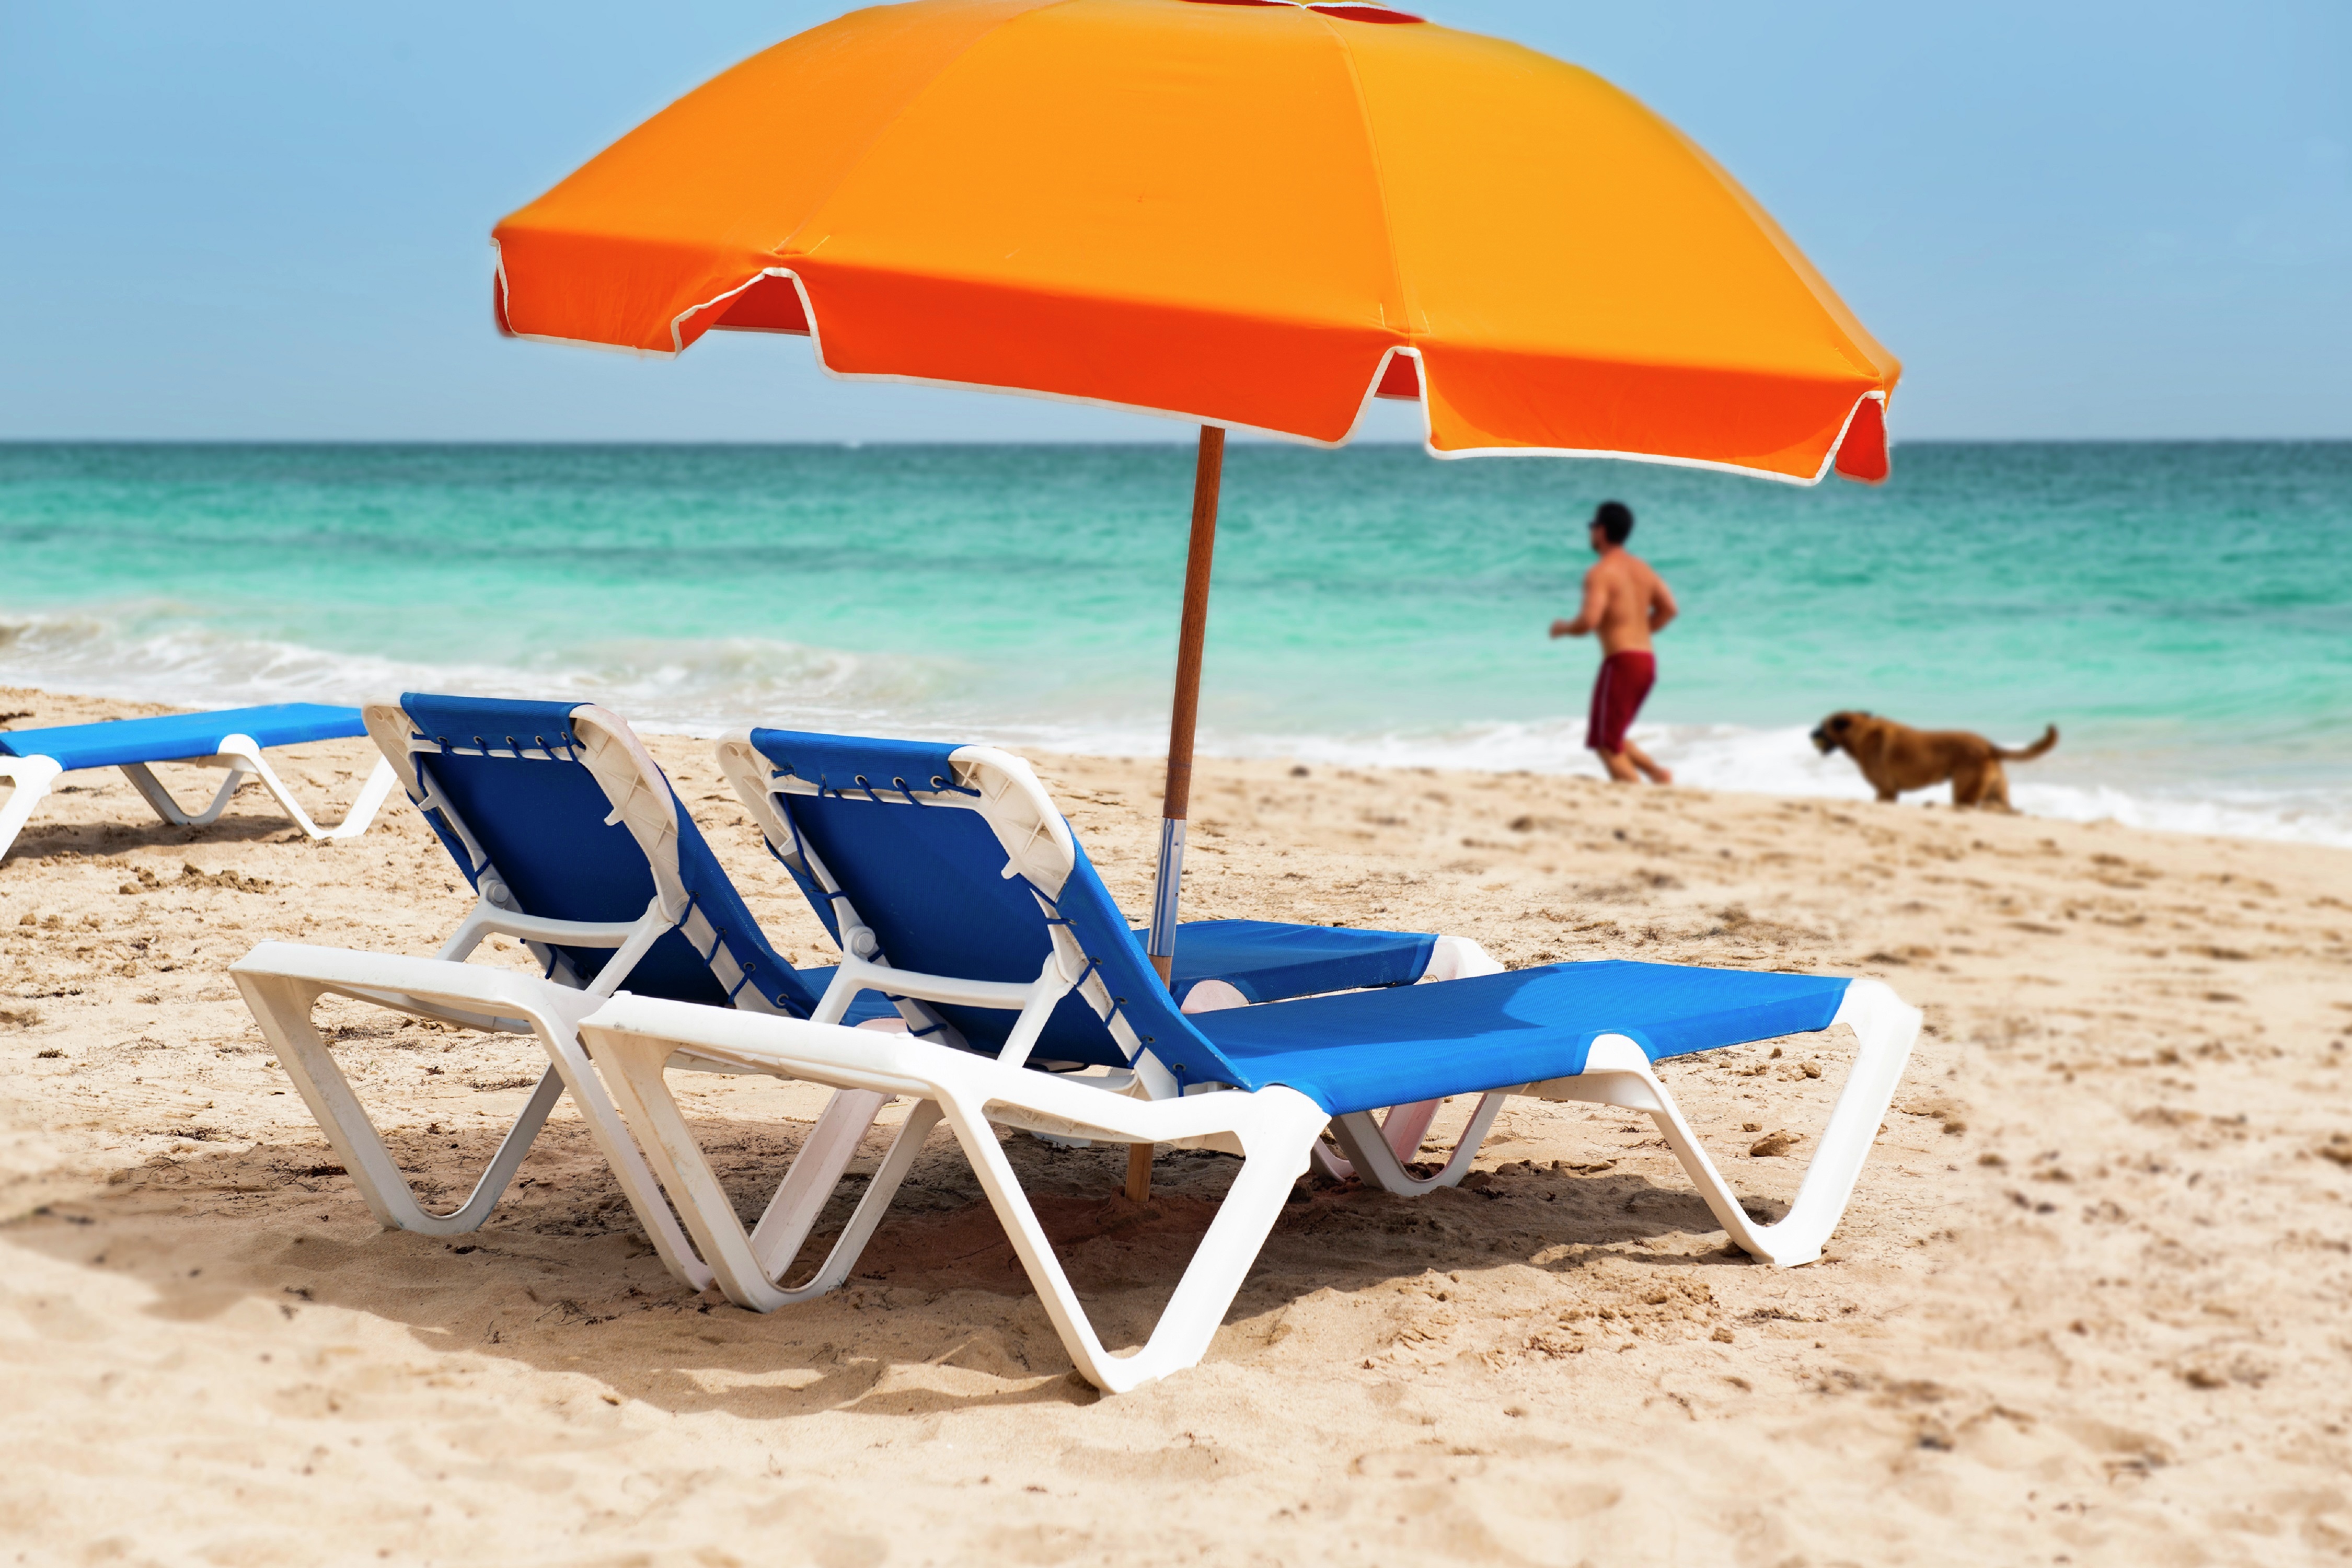 Lounge Chairs under Umbrella at the Beach